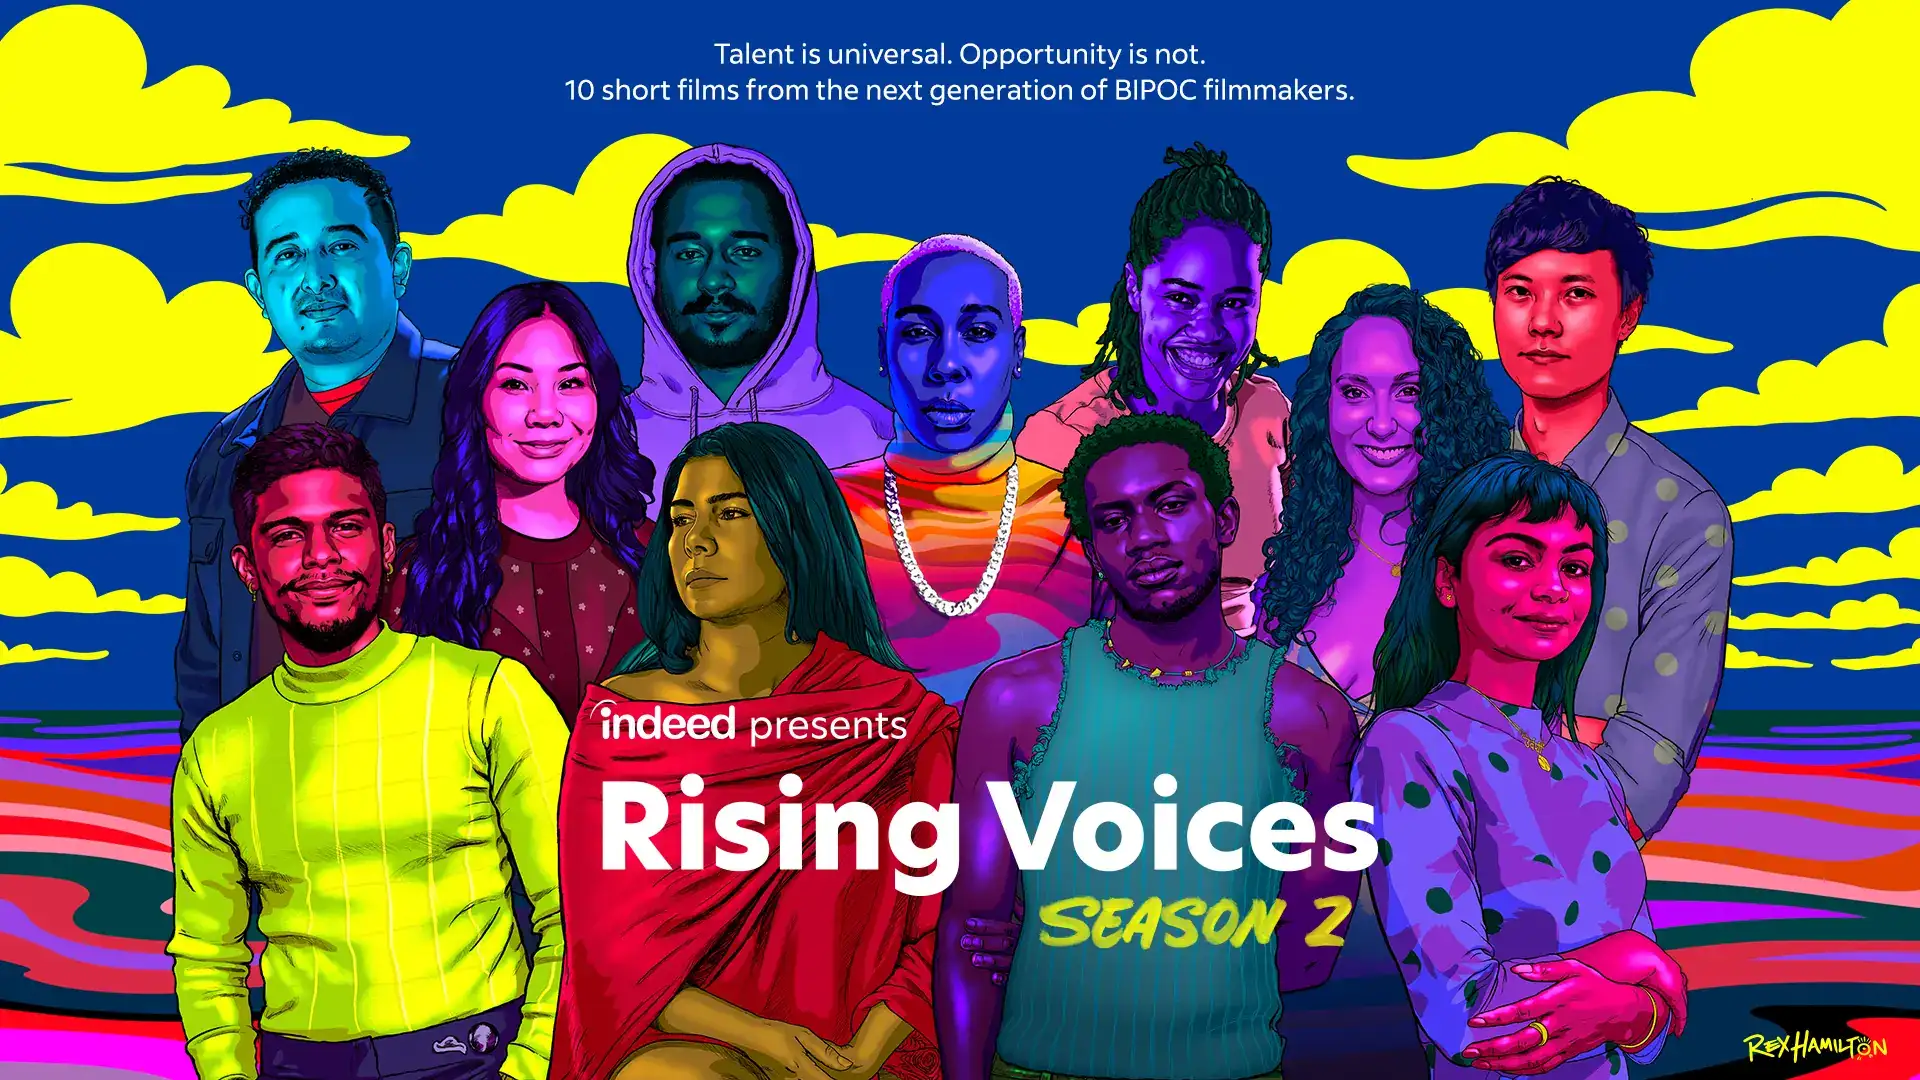 11 people and text 10 short films from the next generation of BIPOC filmmakers, Indeed presents Rising Voices season 2